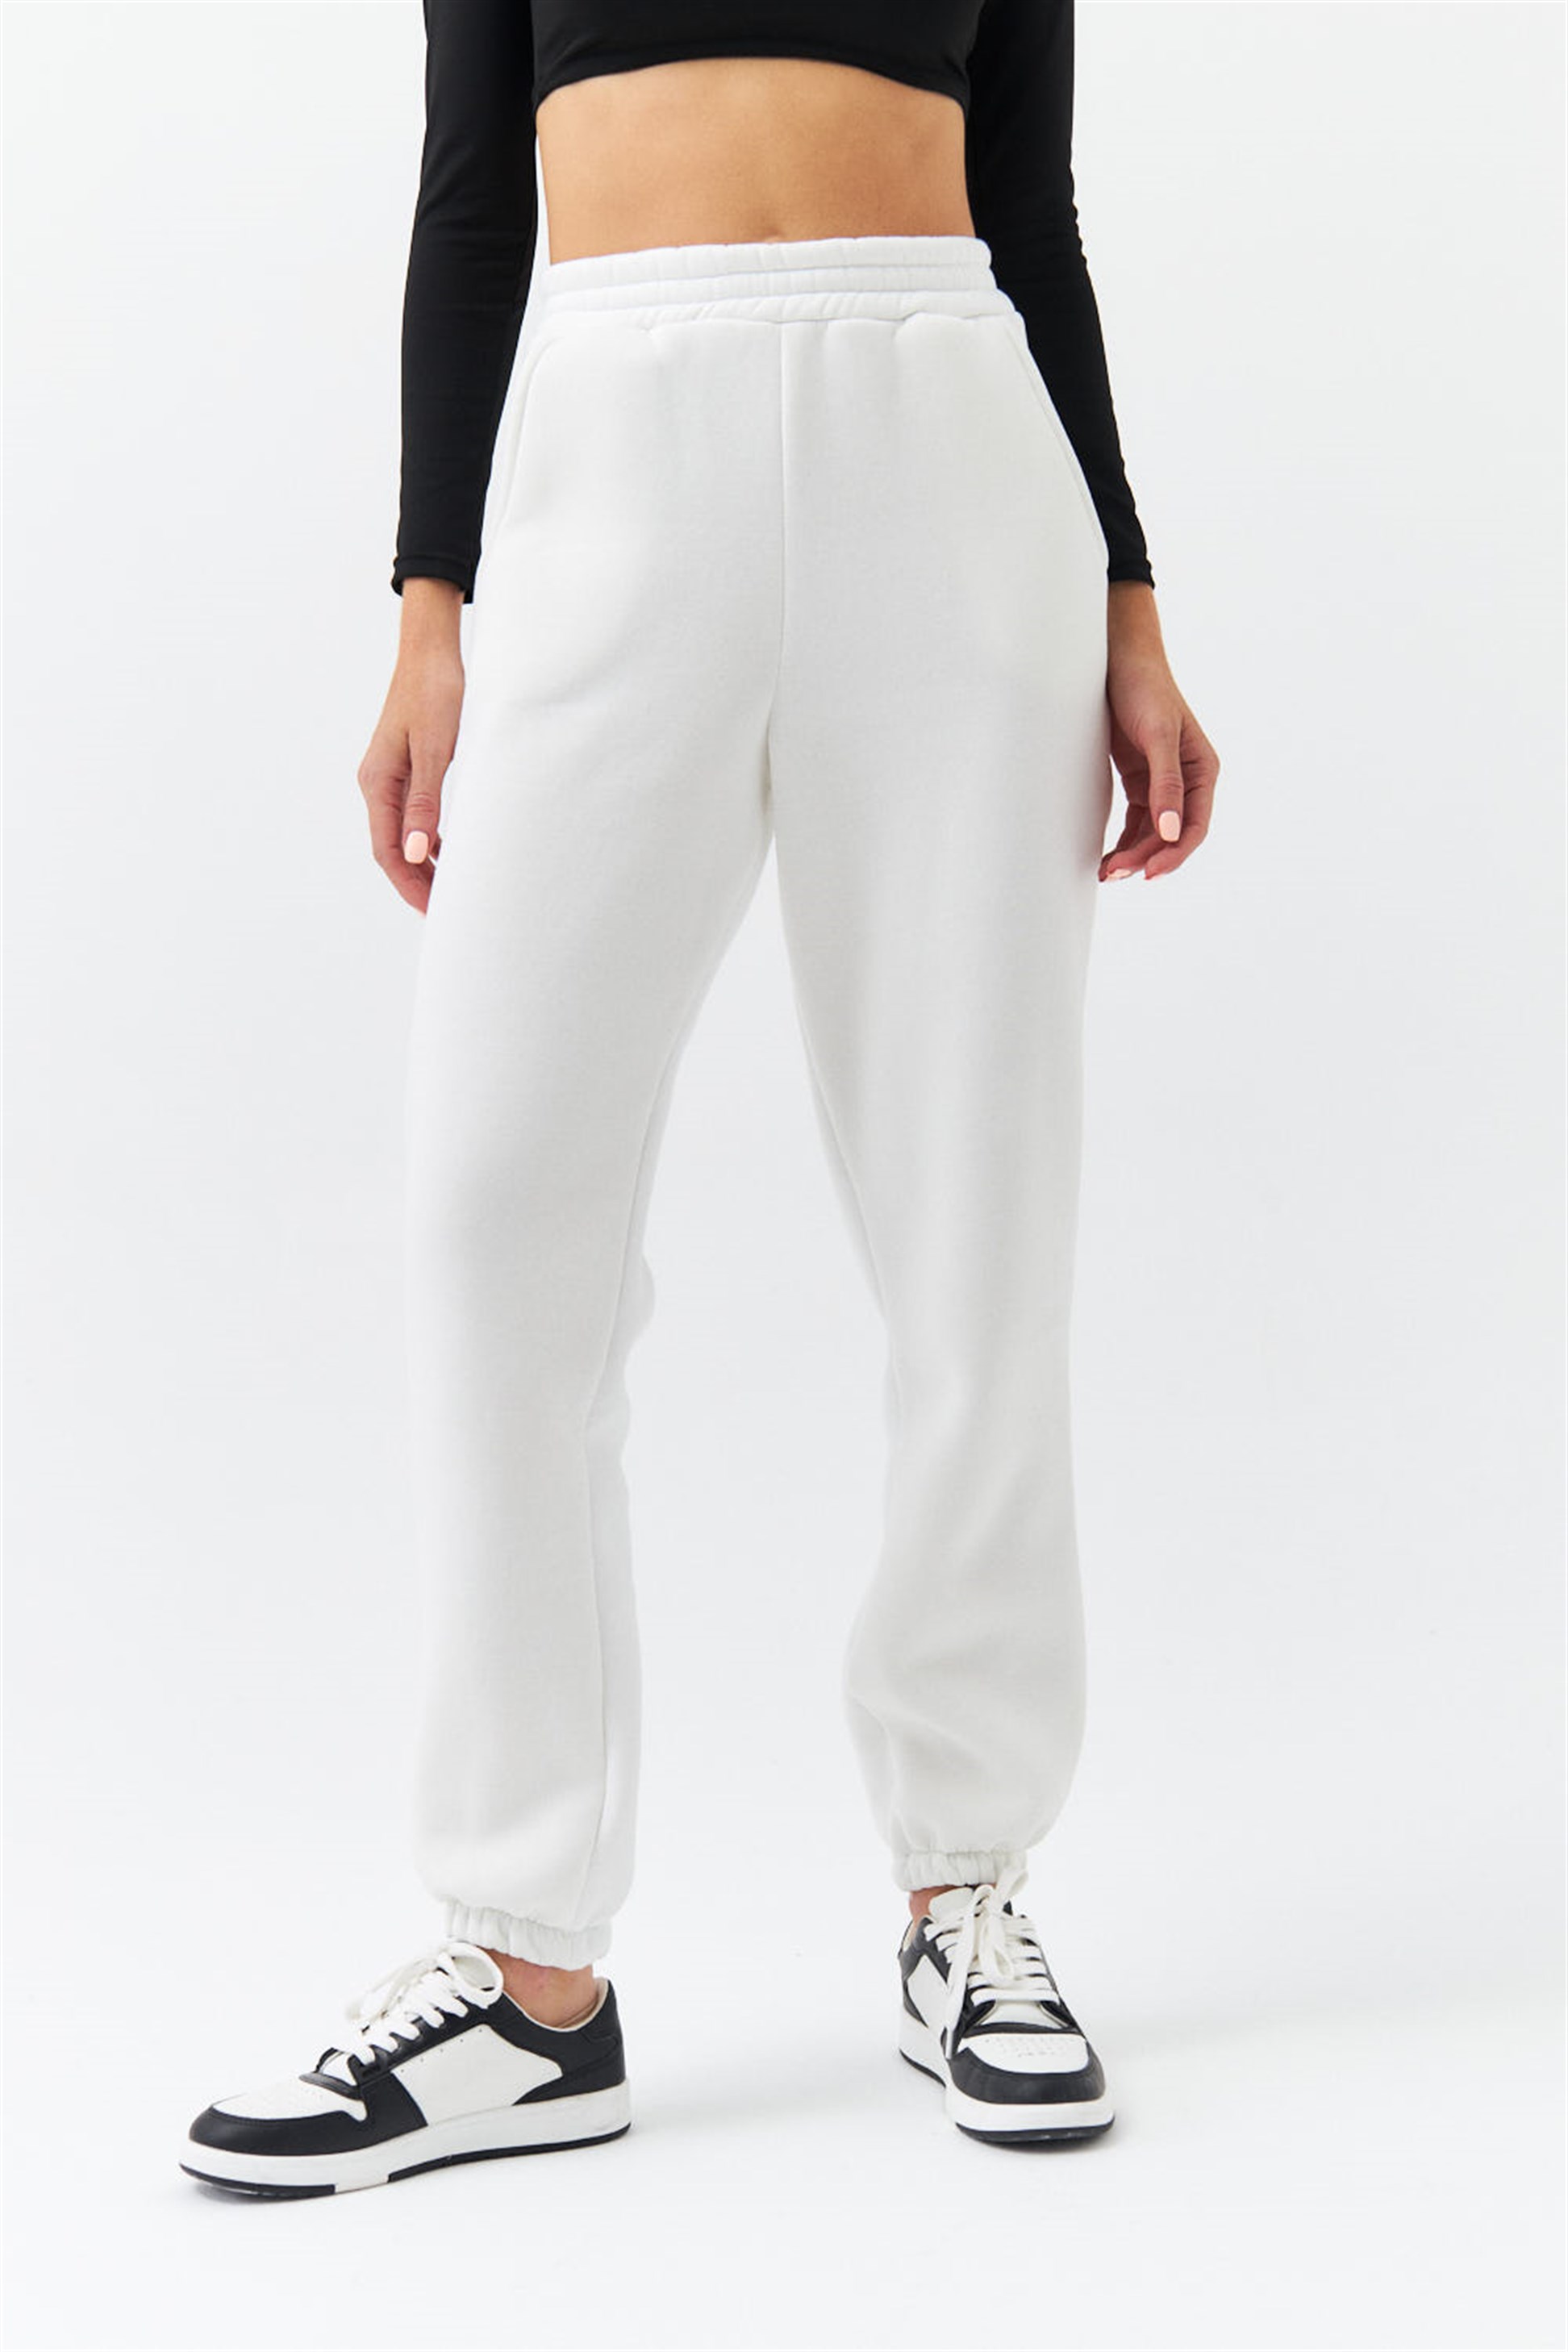 Beige M ONLY tracksuit and joggers discount 62% WOMEN FASHION Trousers Tracksuit and joggers Flowing 